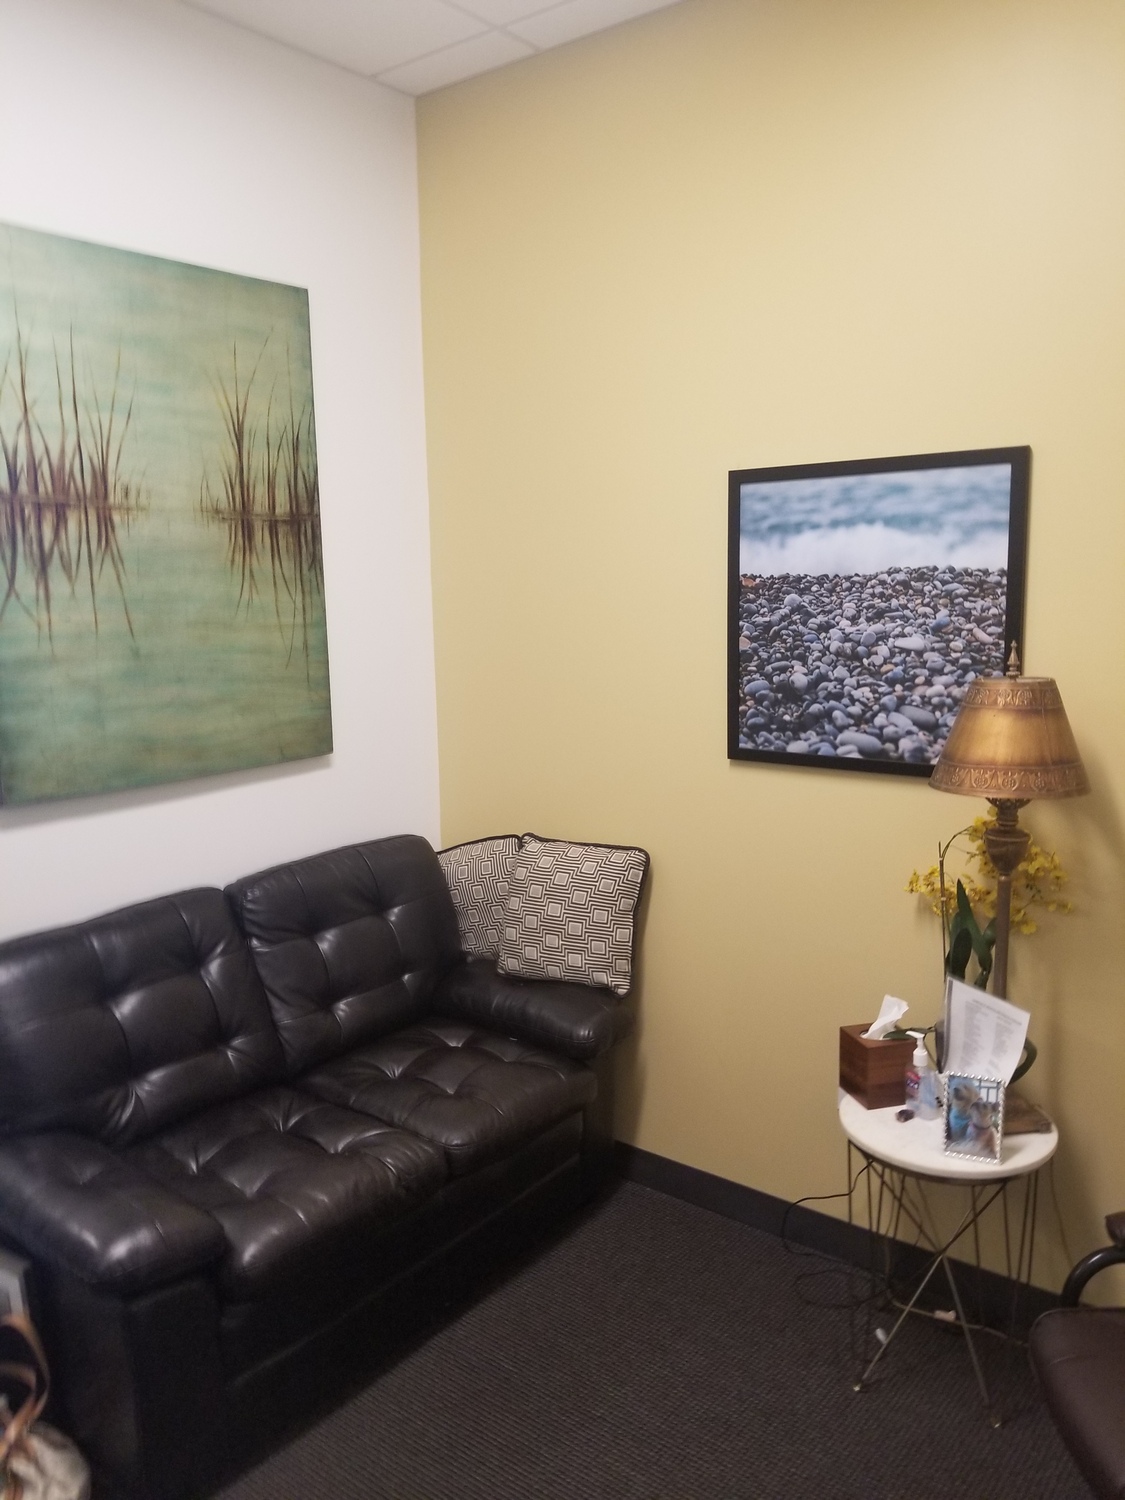 Gallery Photo of Quiet, cozy office setting provides a safe space for healing.